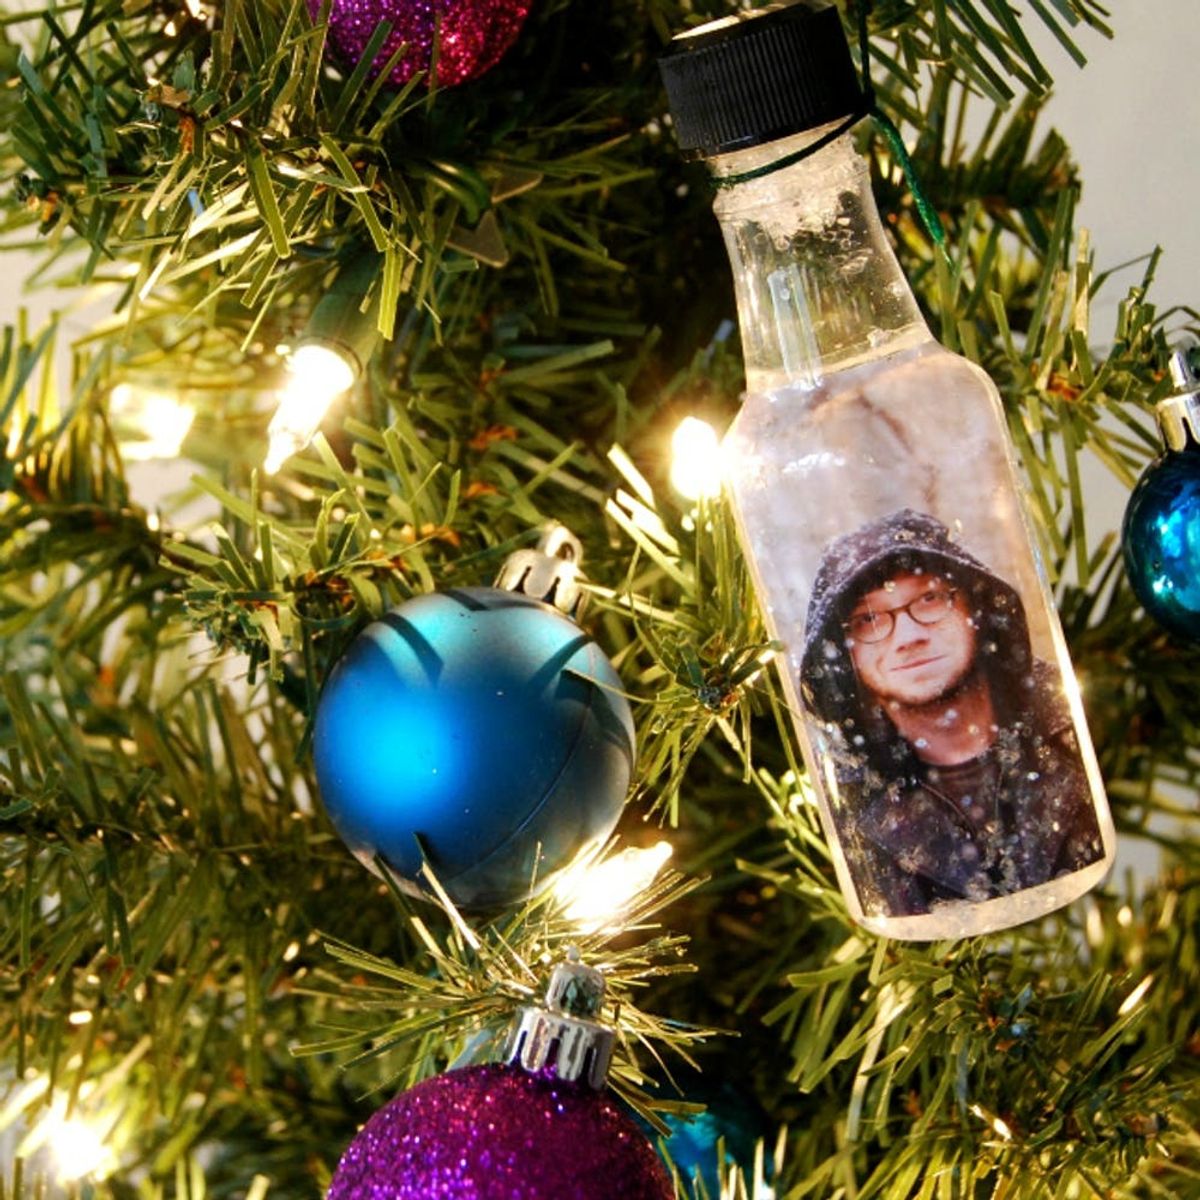 How to Turn Little Liquor Bottles into Photo Snow Globe Ornaments